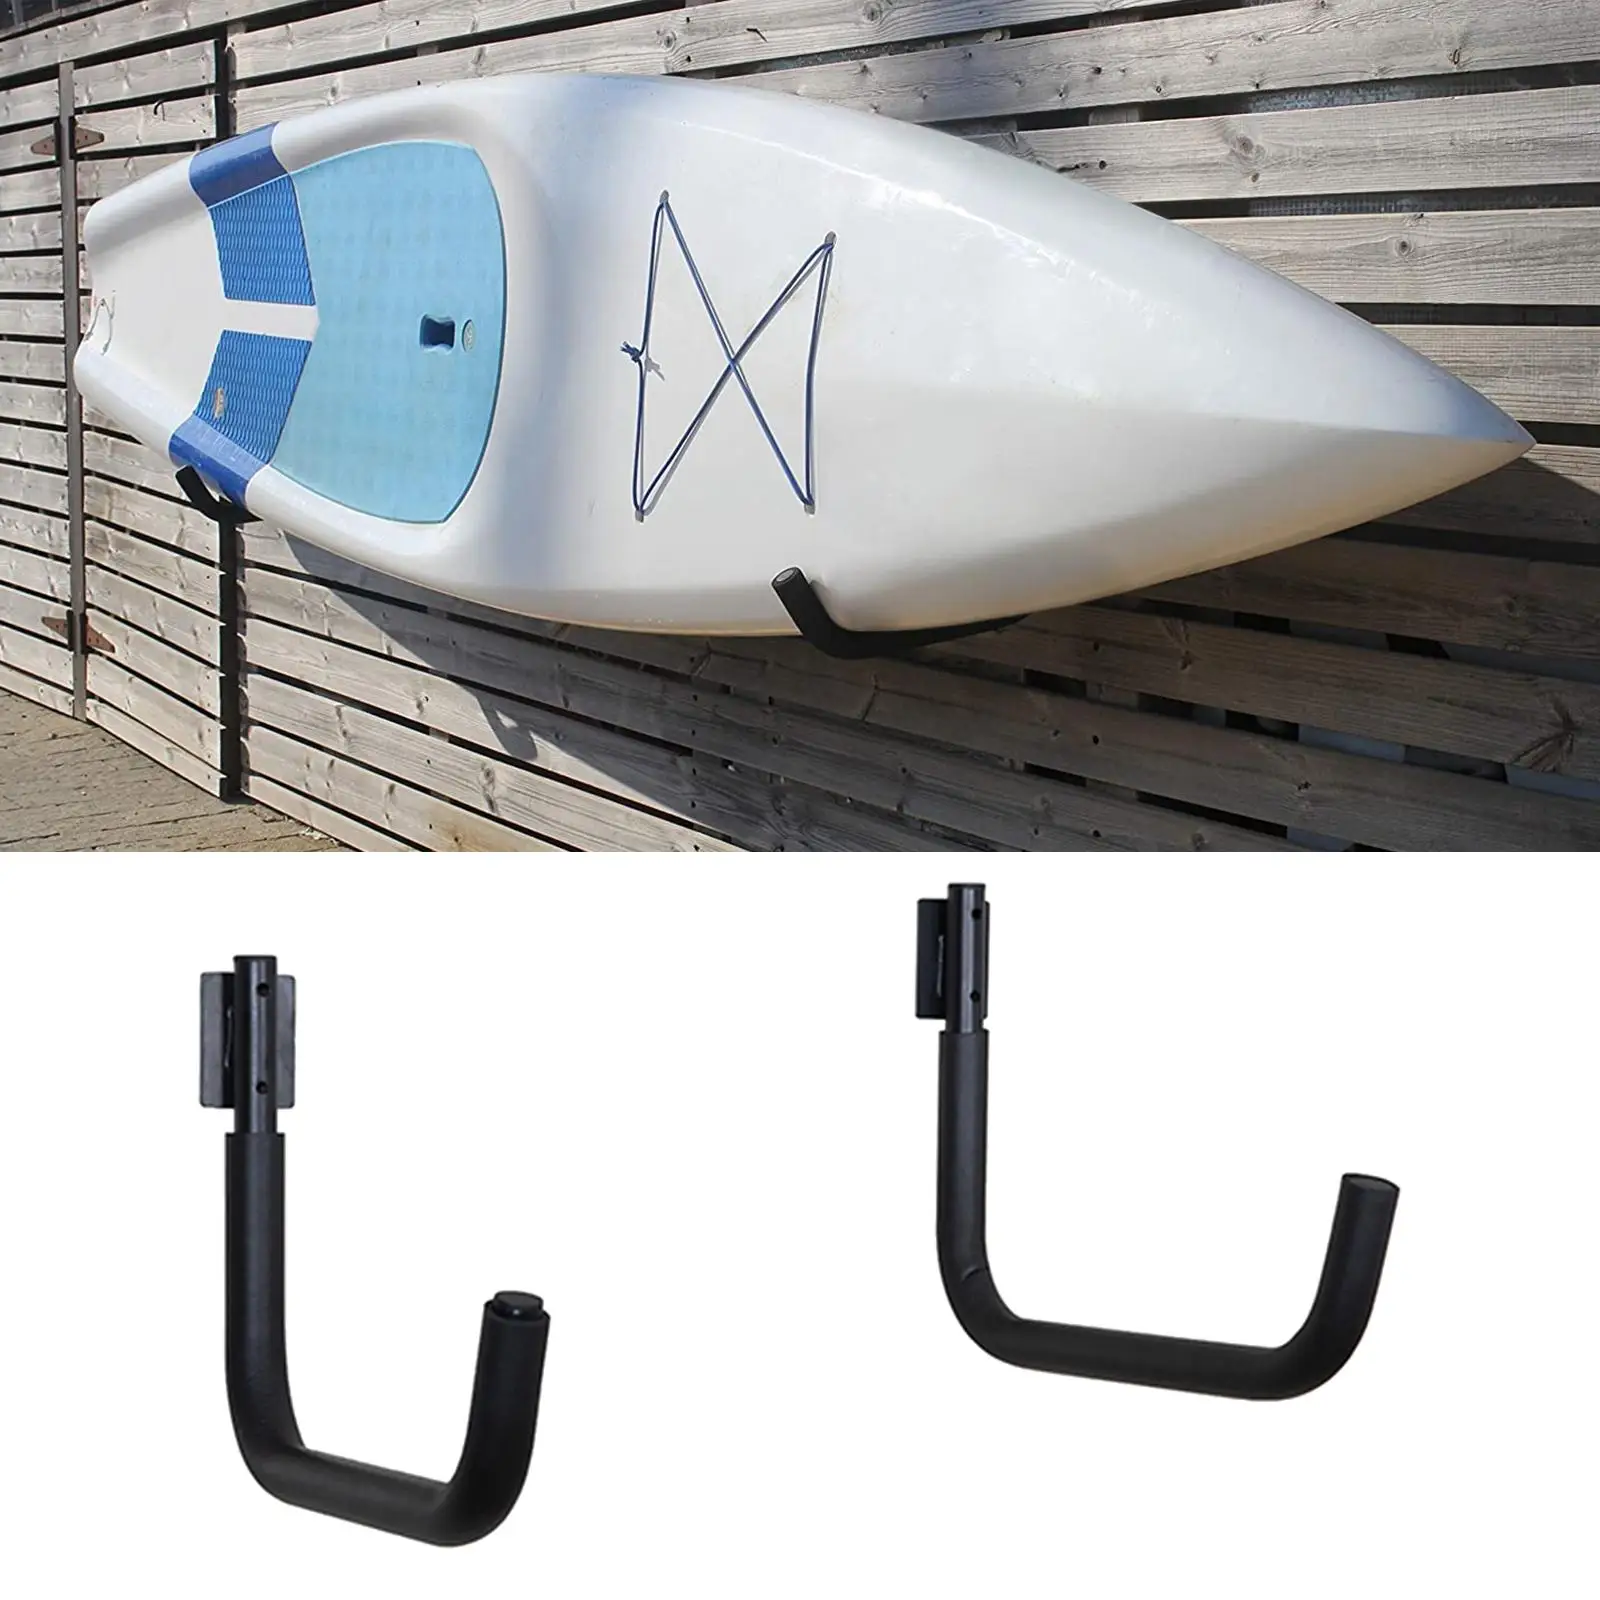 Surfboard Hangers for Walls Kayak Paddle Board Storage Rack with 2pcs Straps LVOERTUIG Kayak Storage Rack Surfboard Wall Mount Garage Hanger Max Load 100lbs/45kg for Kayaks and Paddle Board 